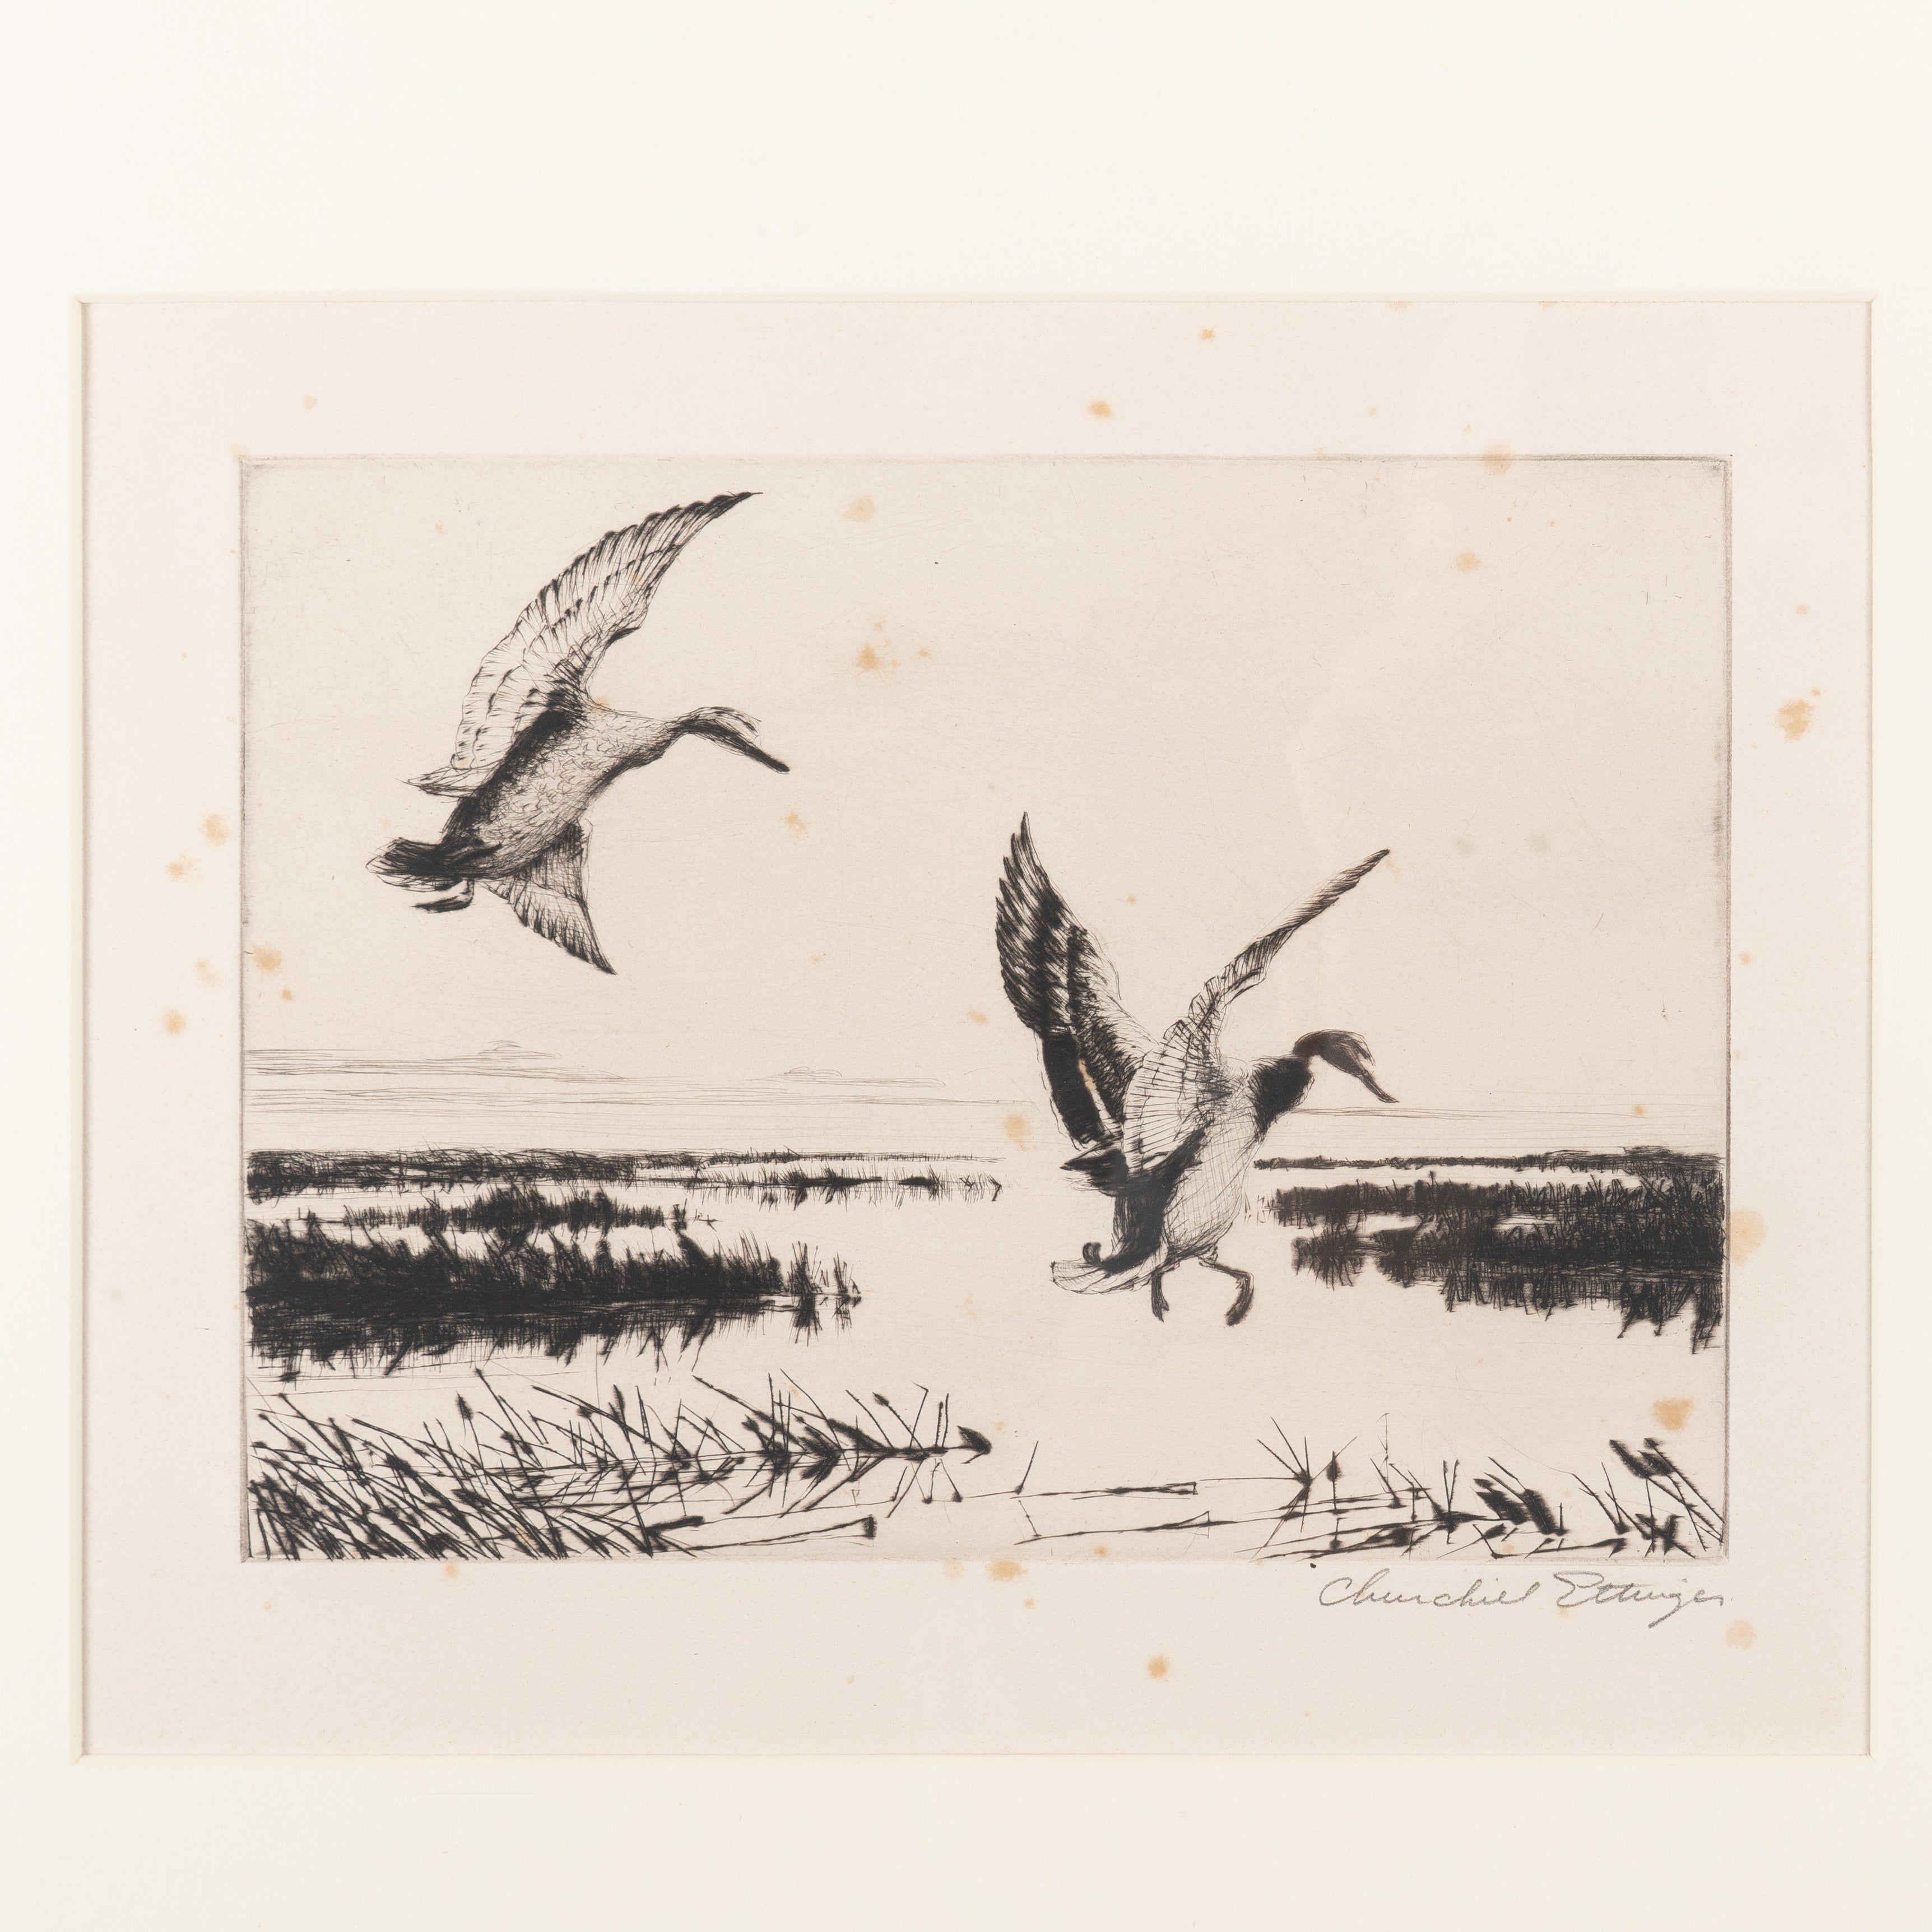 Engraving, printed on paper, of flying mallard ducks. Signed in graphite Churchill Ettinger (1903-1985). Ettinger studied at Columbia University, National Academy of Design, The Art Students League, and the New York School of Industrial Art, where